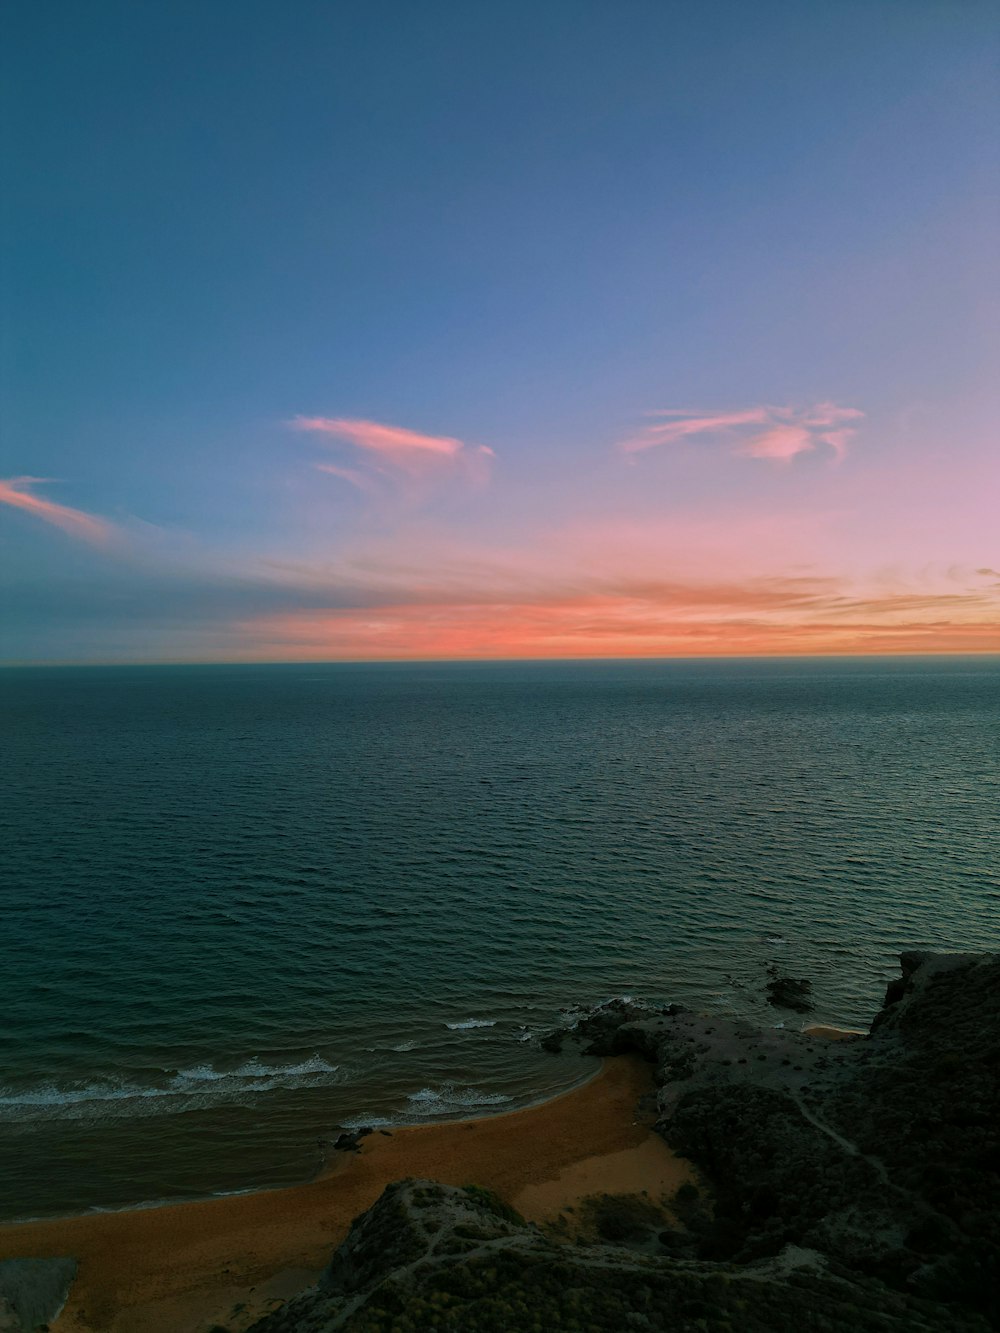 a view of the ocean at sunset from the top of a hill